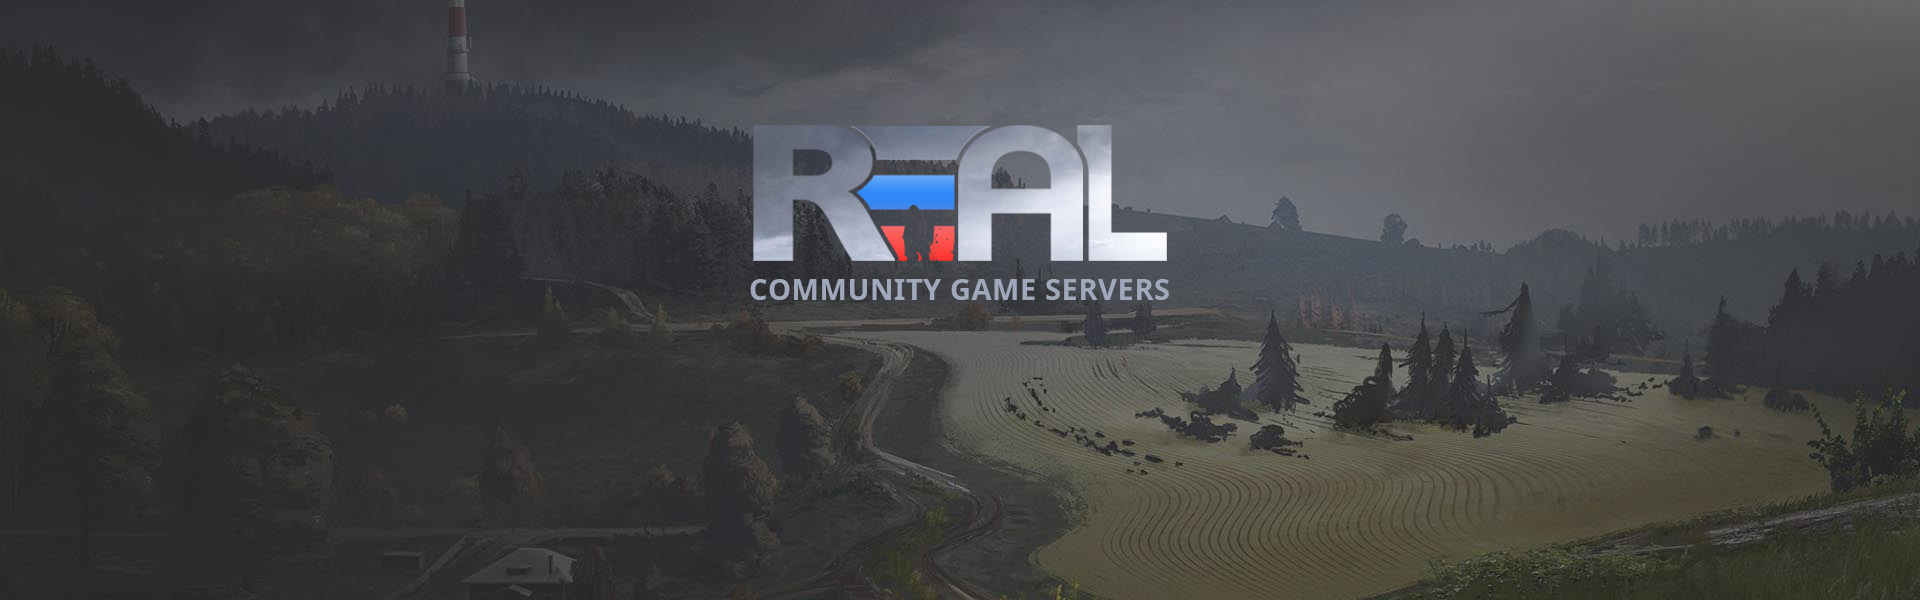 Real Community Game Servers